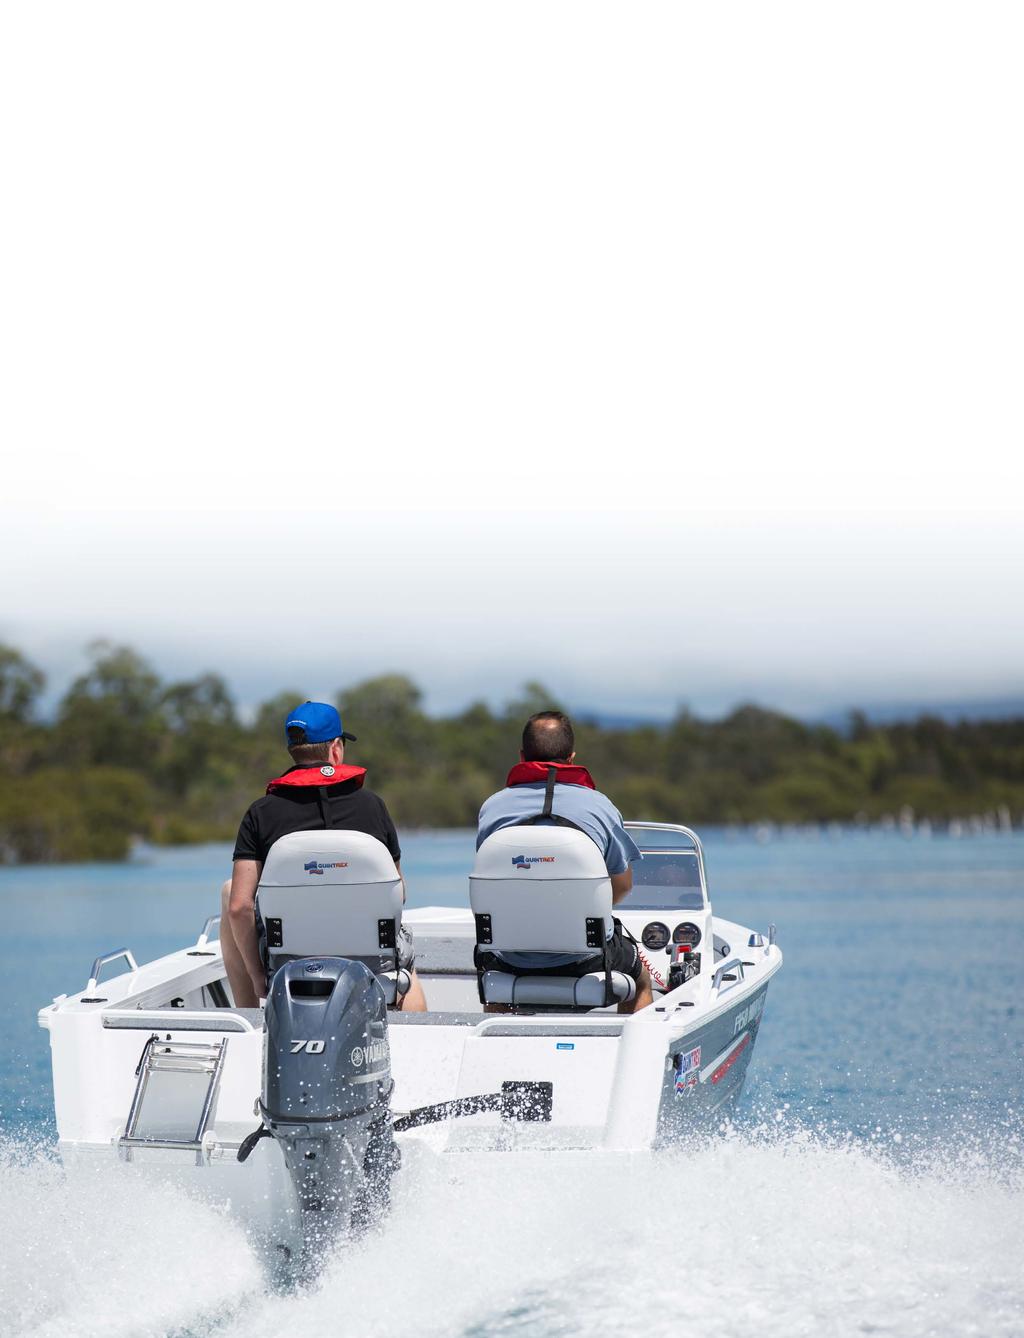 OPtional BENEFITS FOR BOAT OR Personal Watercraft COVER Subject to the terms, conditions limitations and exclusion of Your Policy and any other documentation provided to You, the following Optional